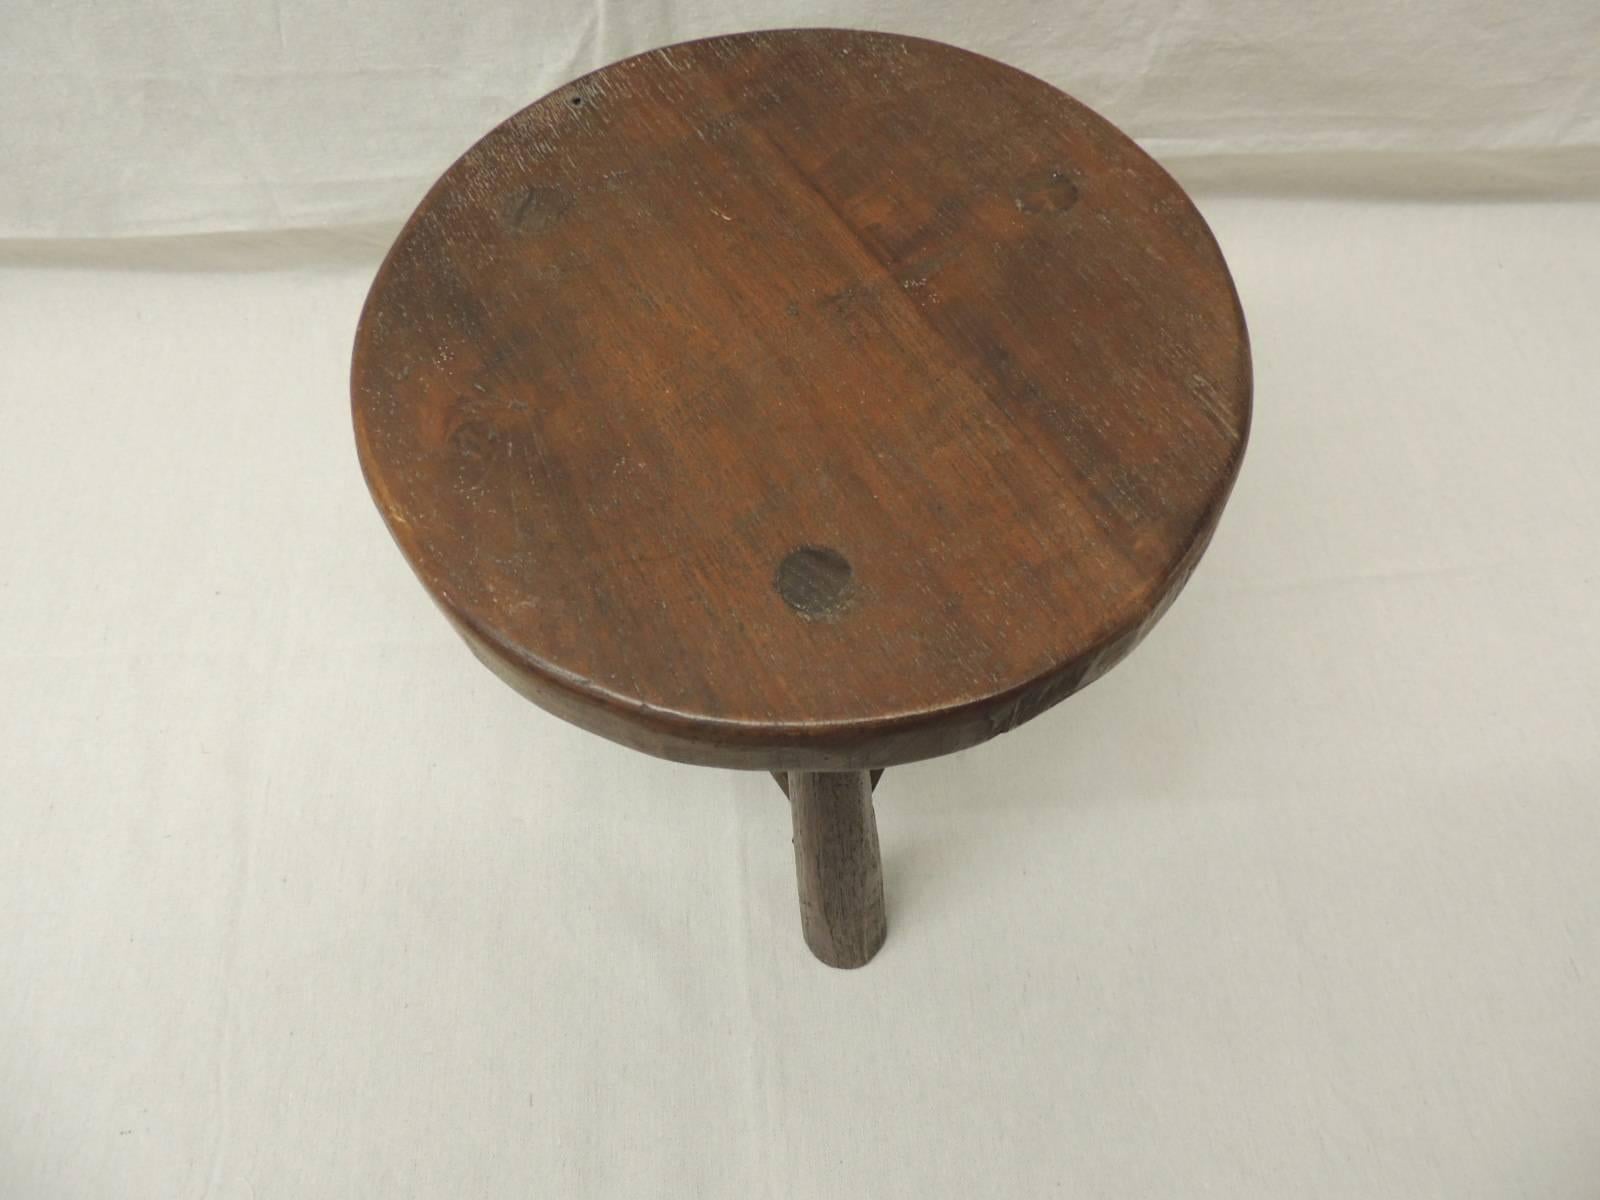 Round wood tripod three legged low stool. Great side table for slipper chairs, drinks table or telephone table. Original manufacture brass plate under the top.